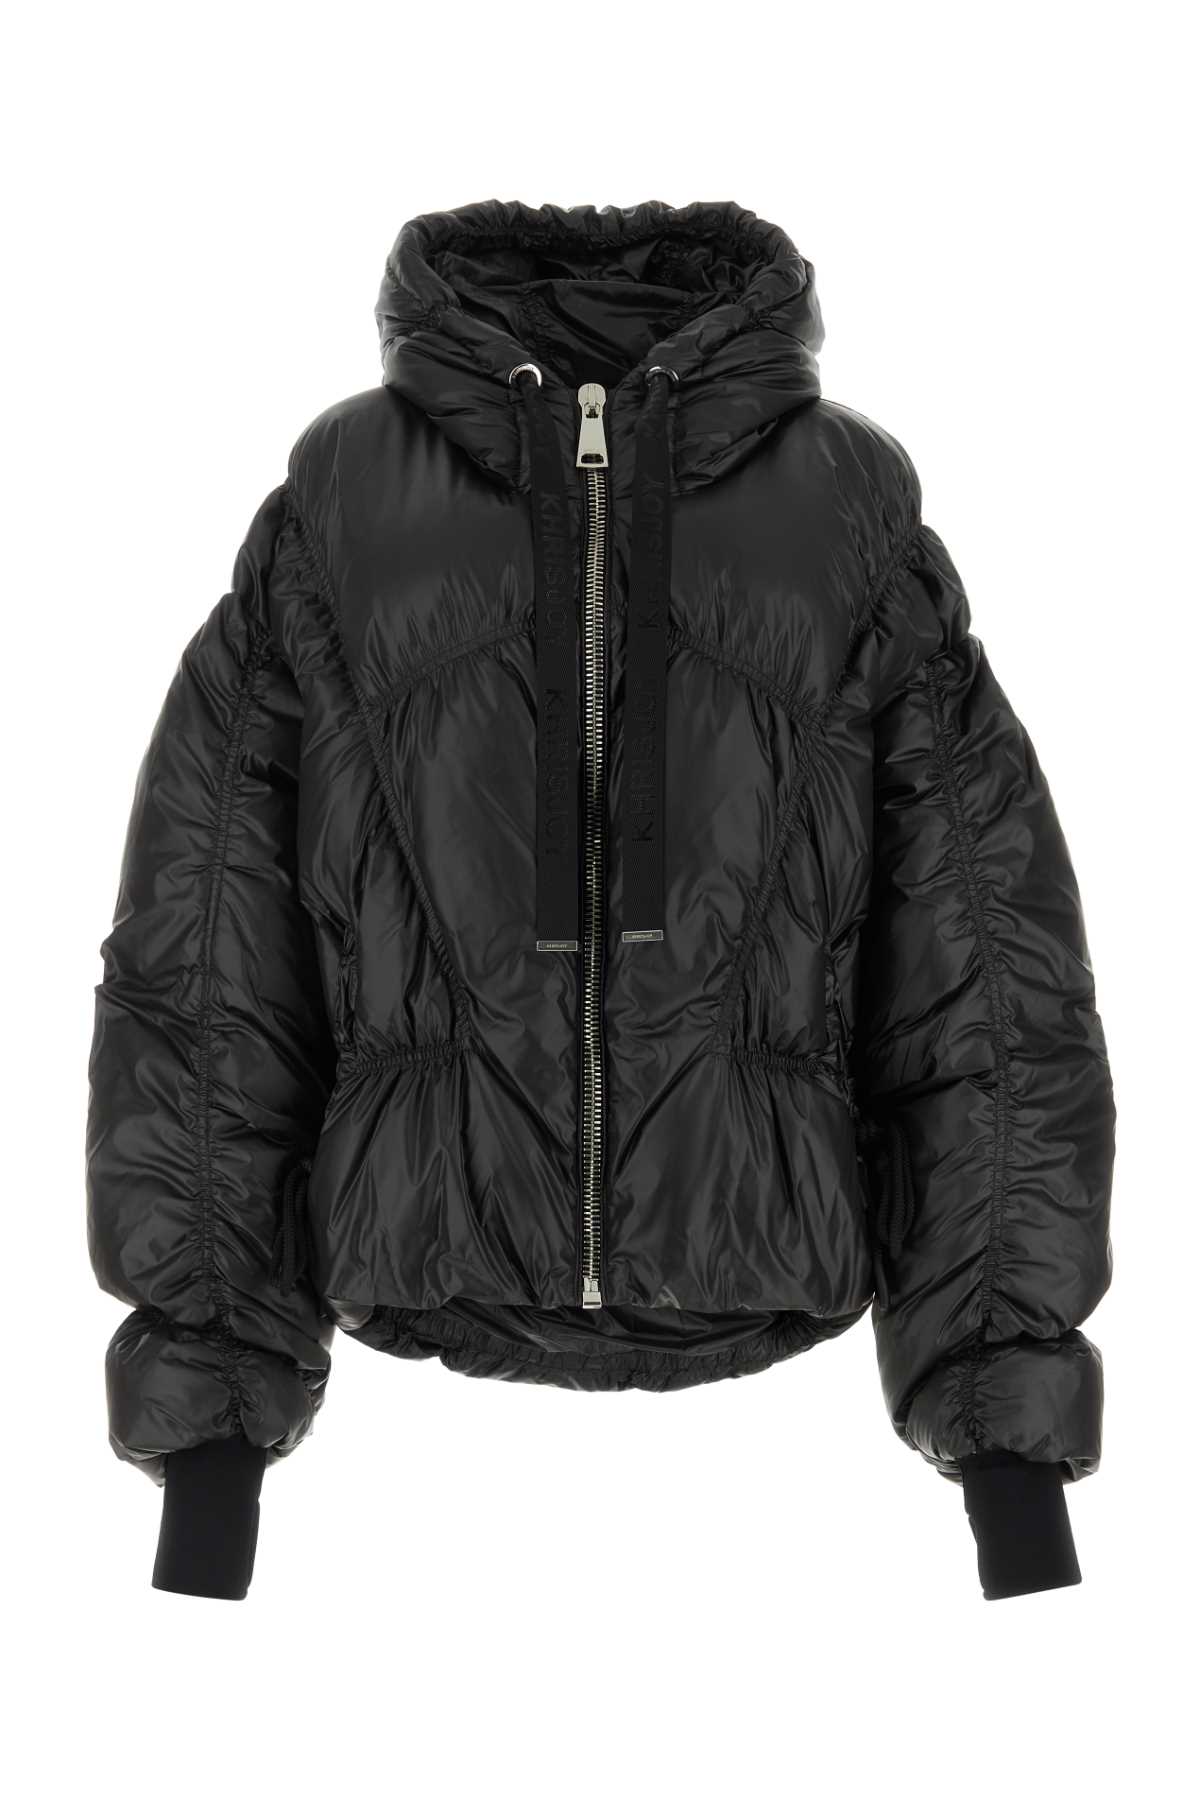 Black Polyester Puff Down Jacket